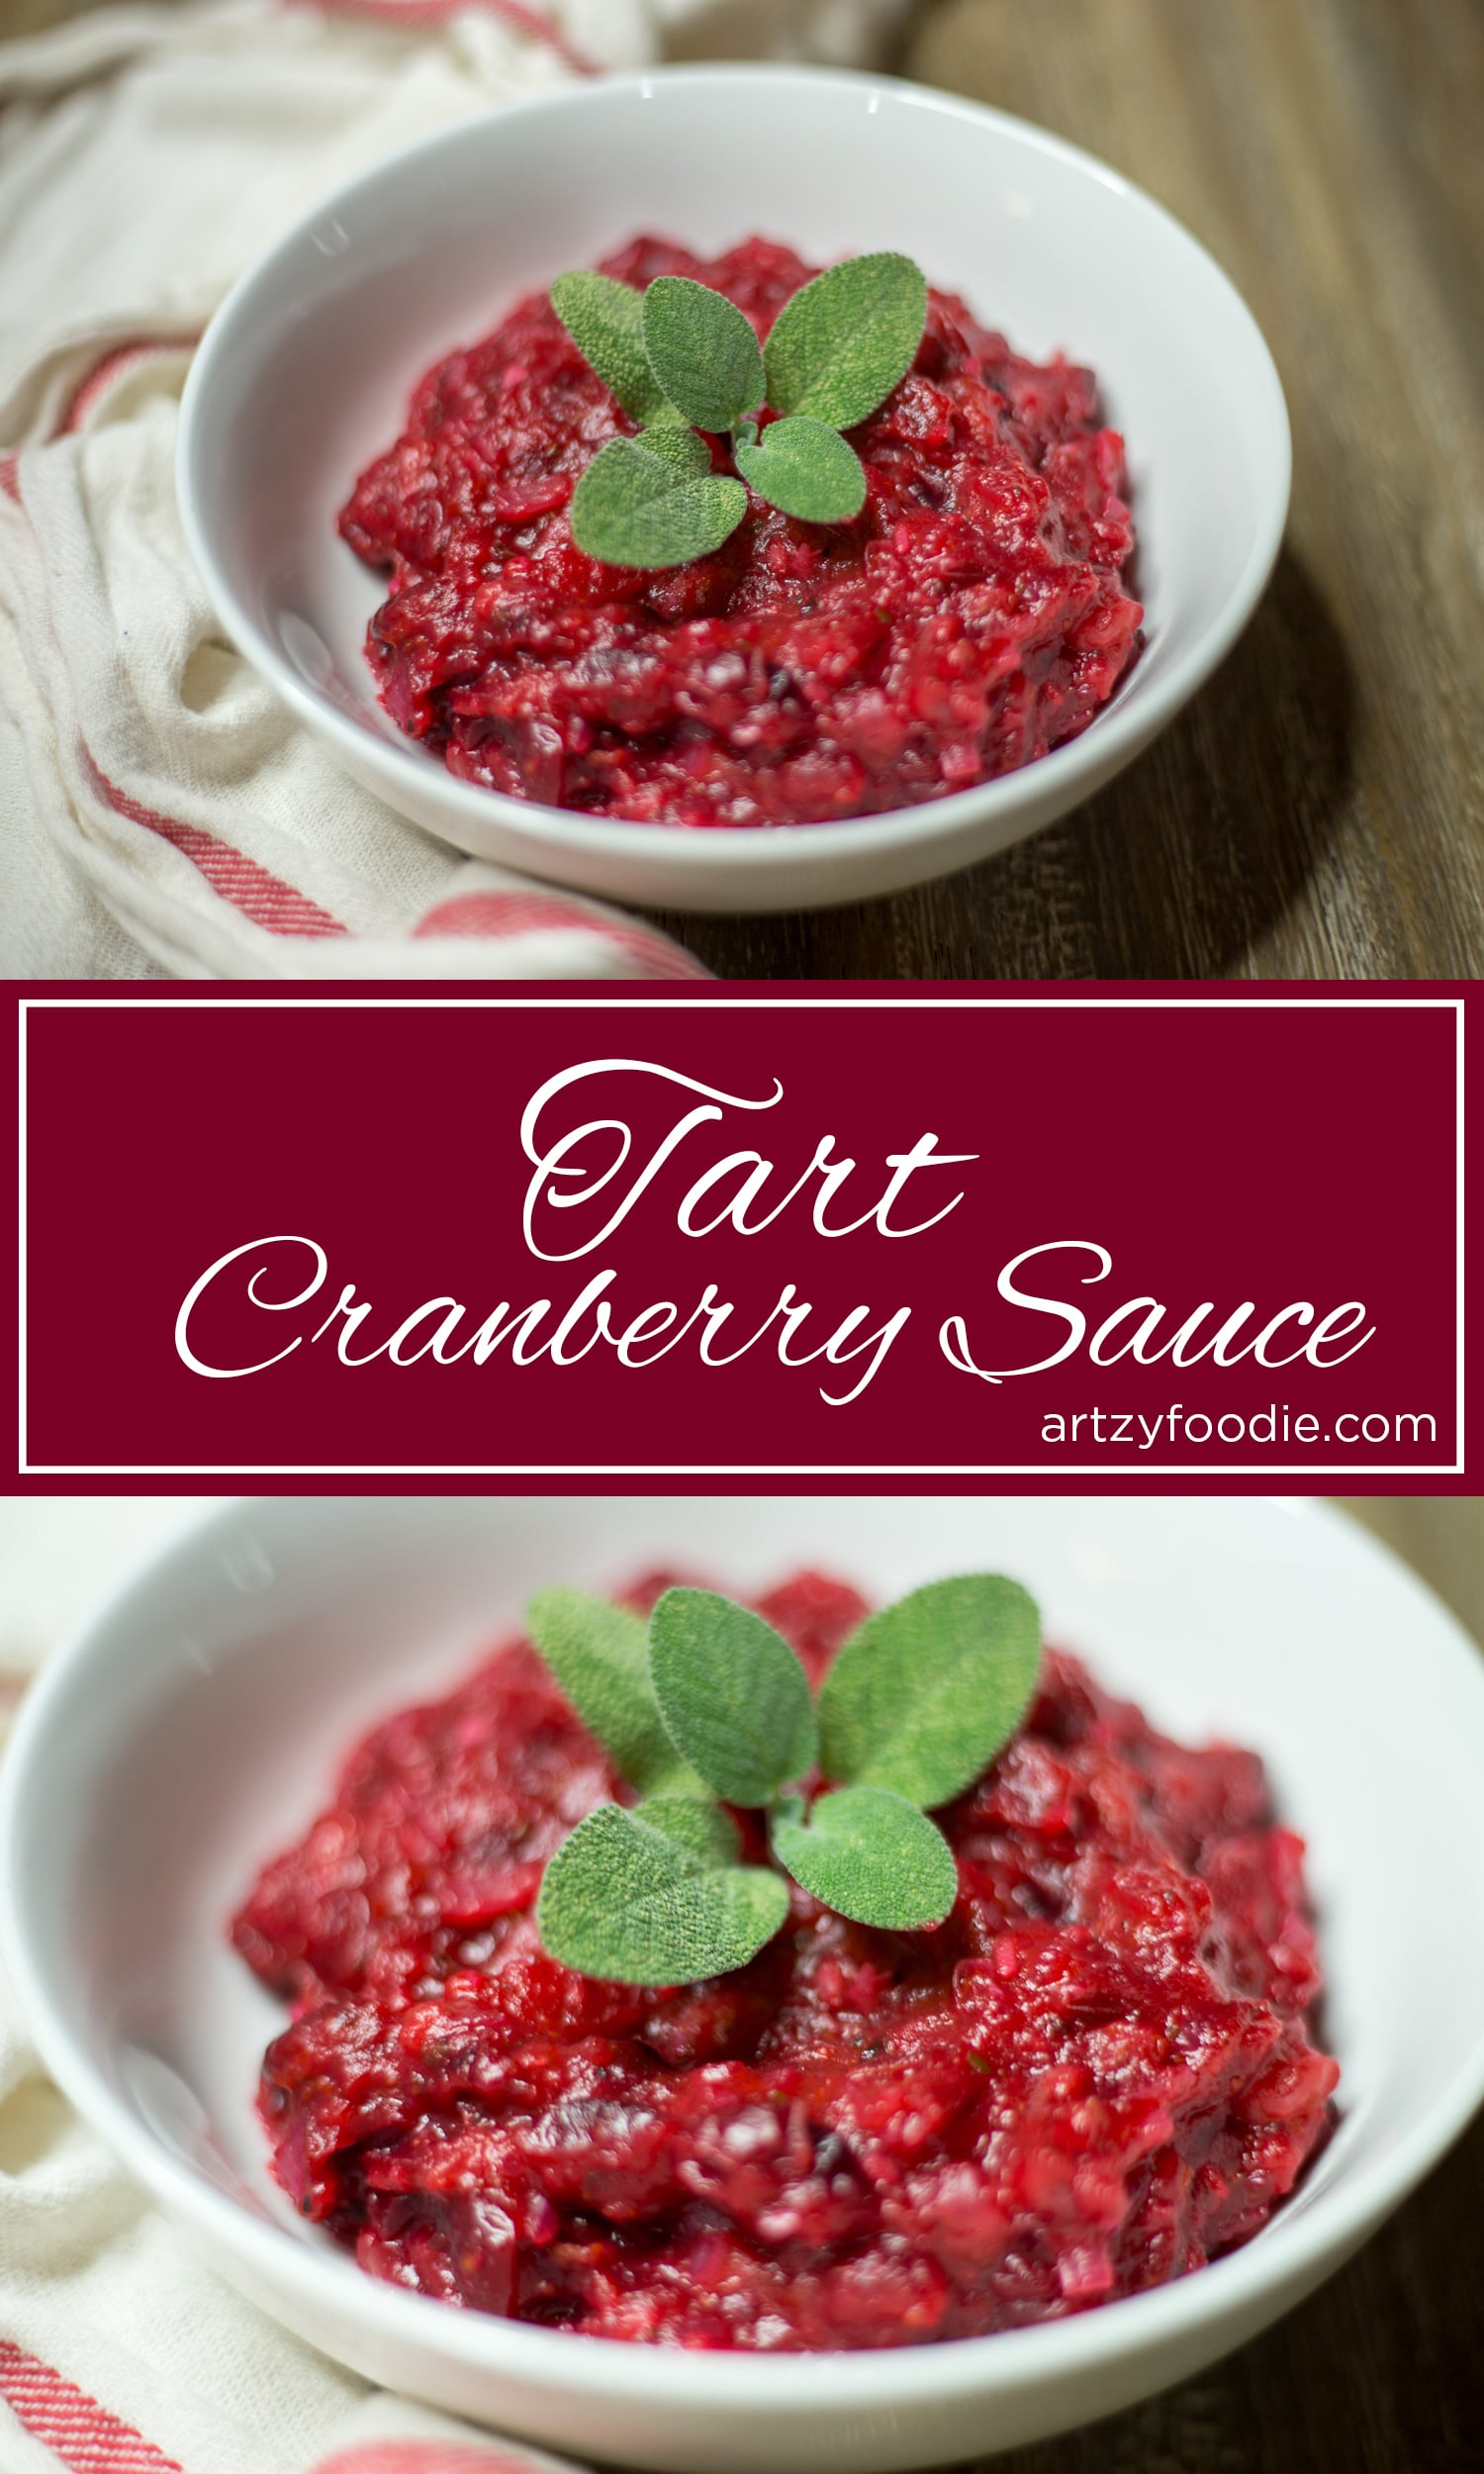 Serve this tart cranberry sauce warm as a Thanksgiving side, or chill and use as a chutney for a yummy left over turkey sandwich.